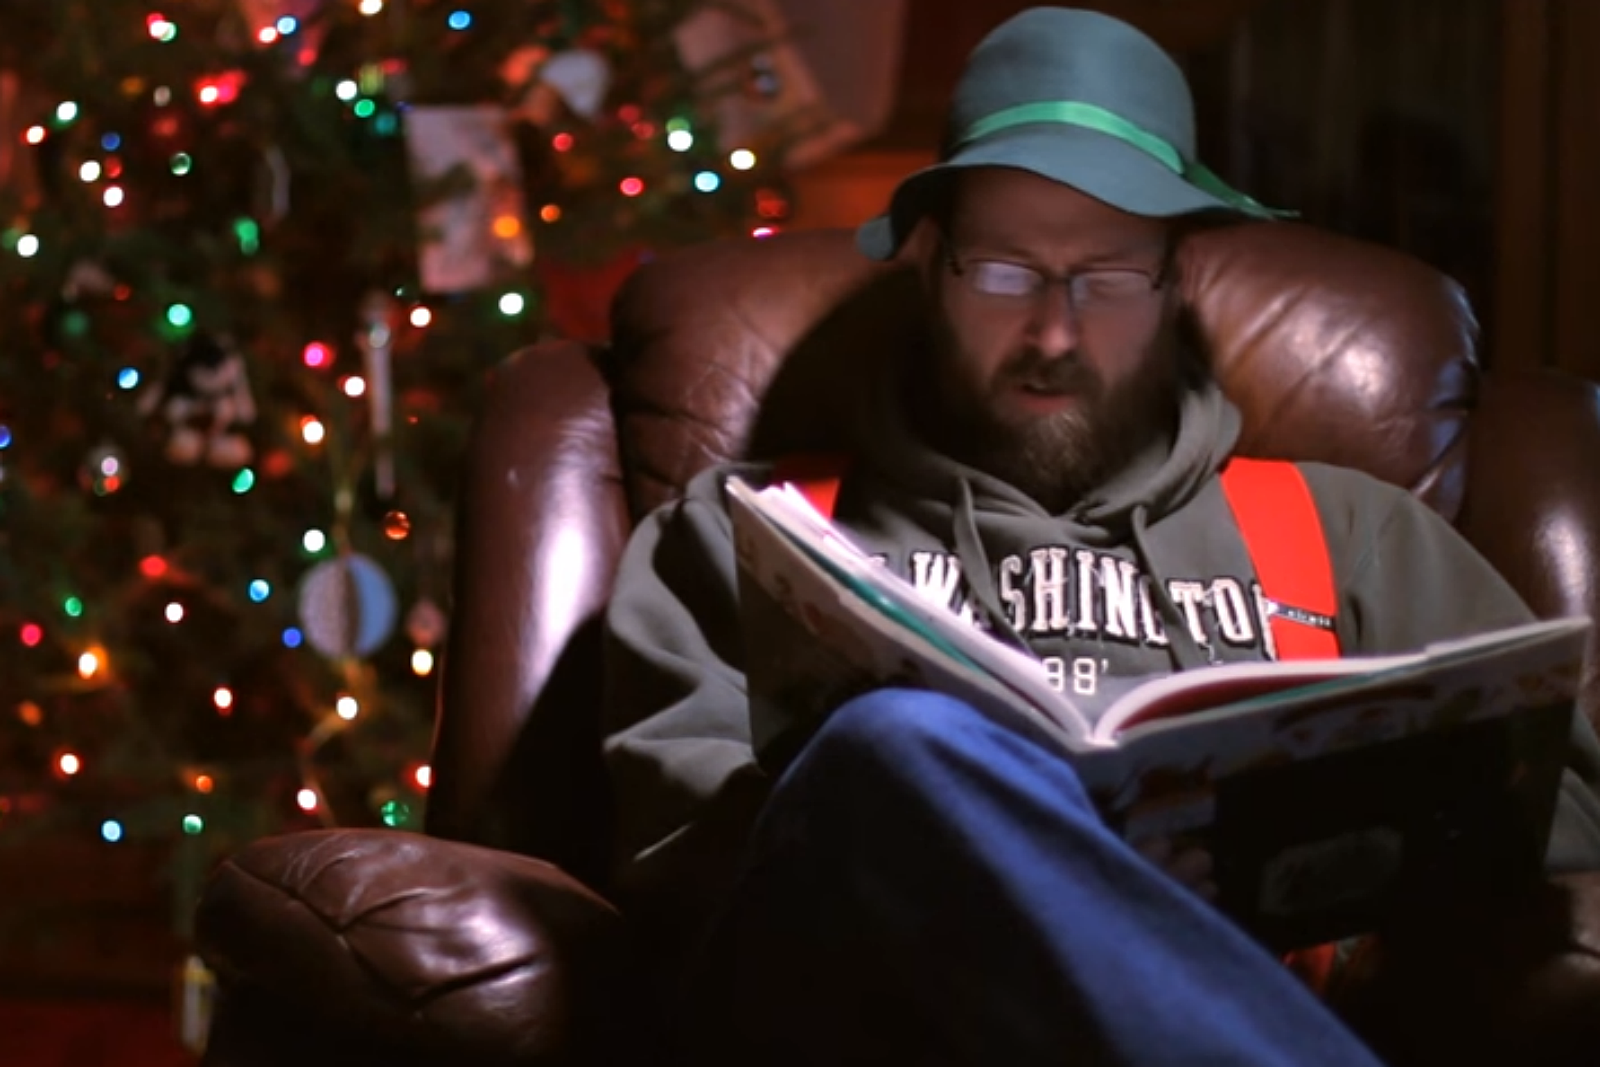 WATCH: Hillbilly Weatherman for the Holidaze [NSFW]